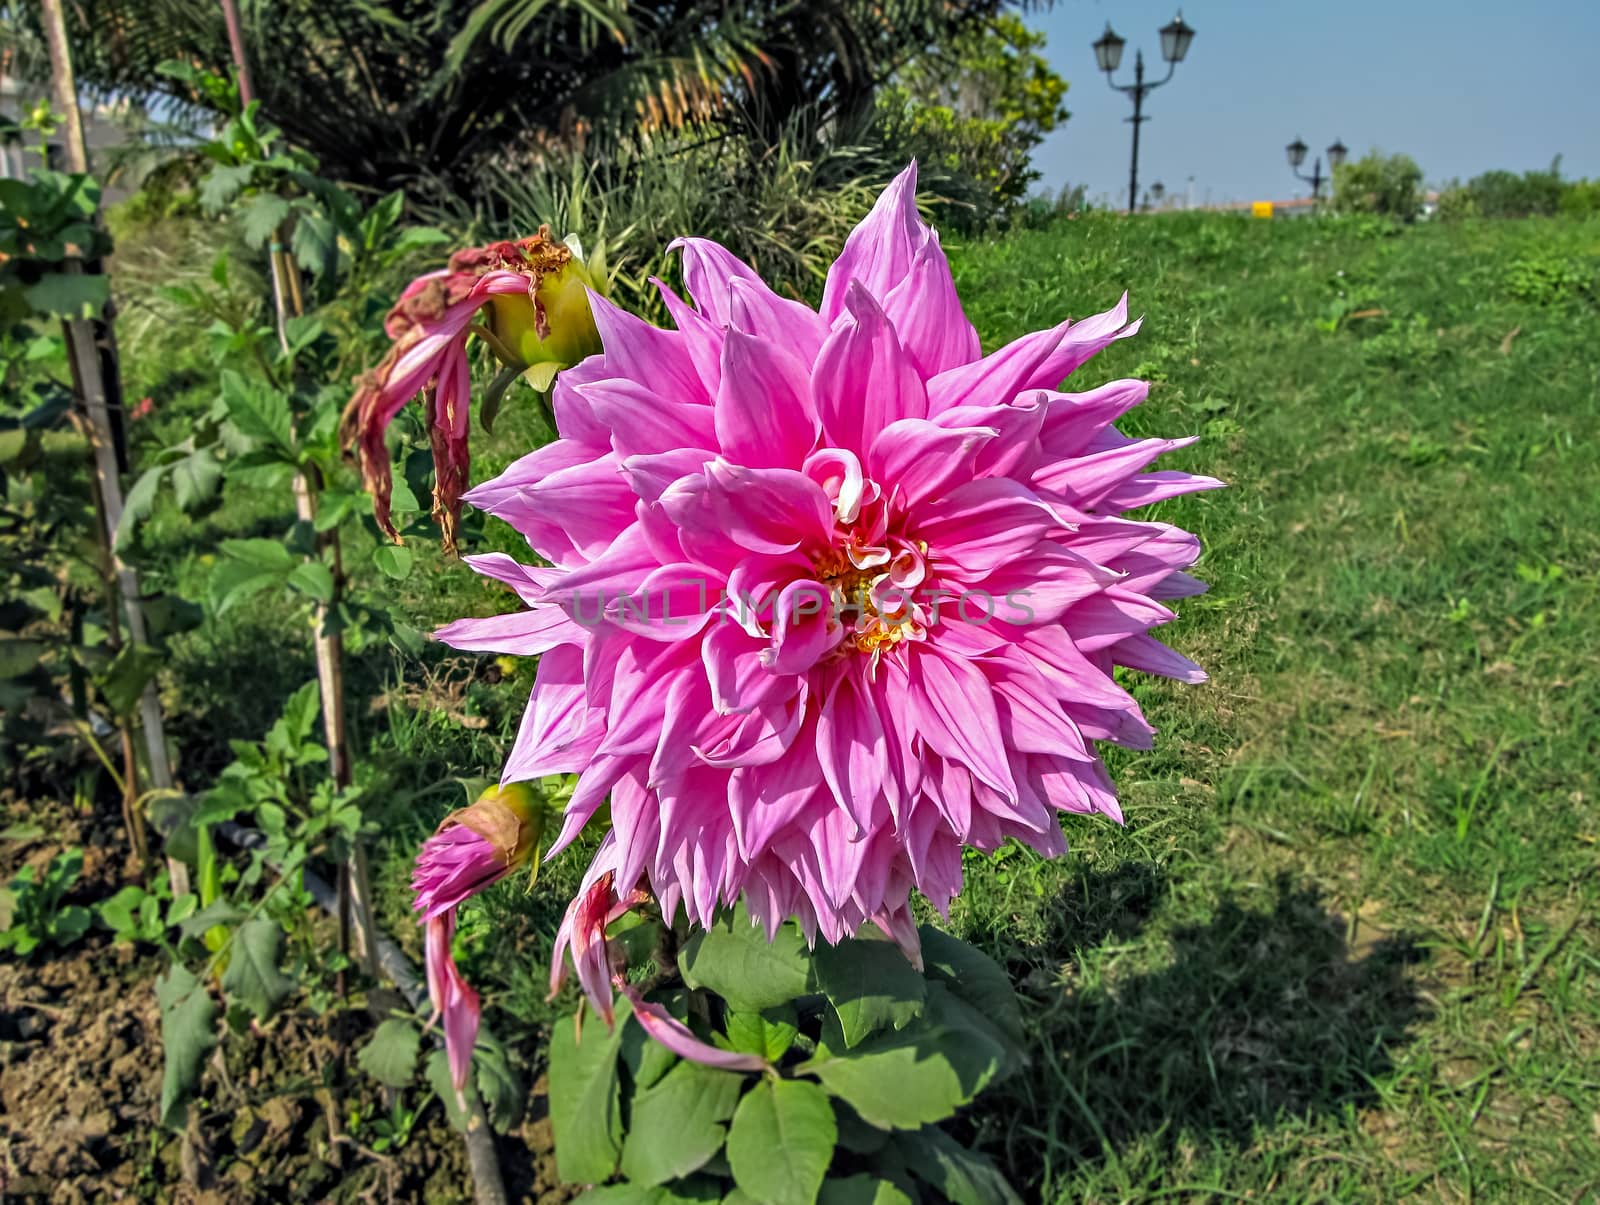 Selective focus, blur background, close up of bright pink Dahlia flower in park. by lalam